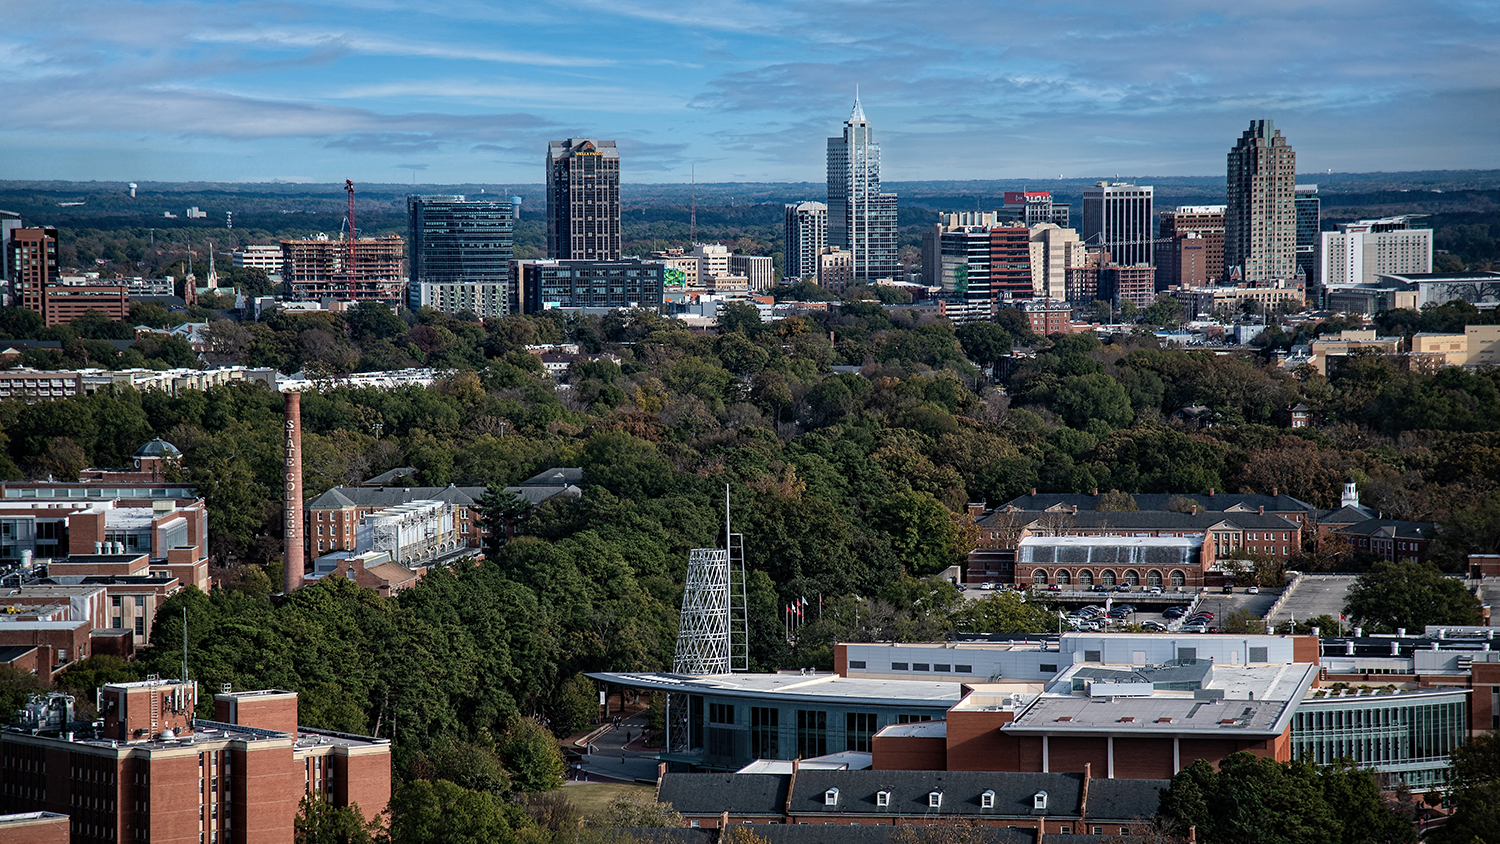 Aerial view of campus with city of Raleigh in the background.